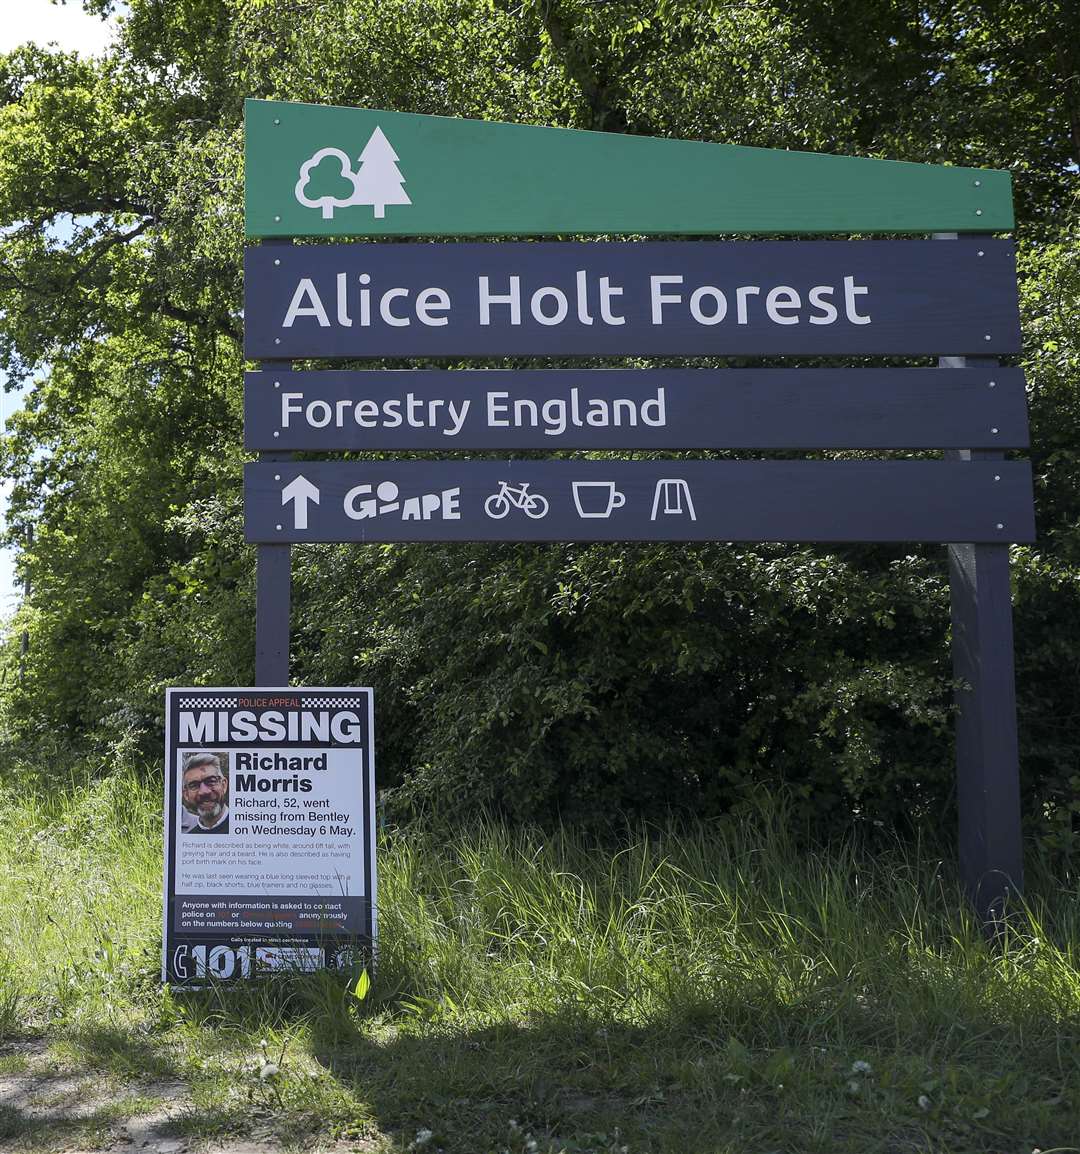 Posters appealing for information on missing diplomat Richard Morris have been put up at the Alice Holt Forest (Steve Parsons/PA)